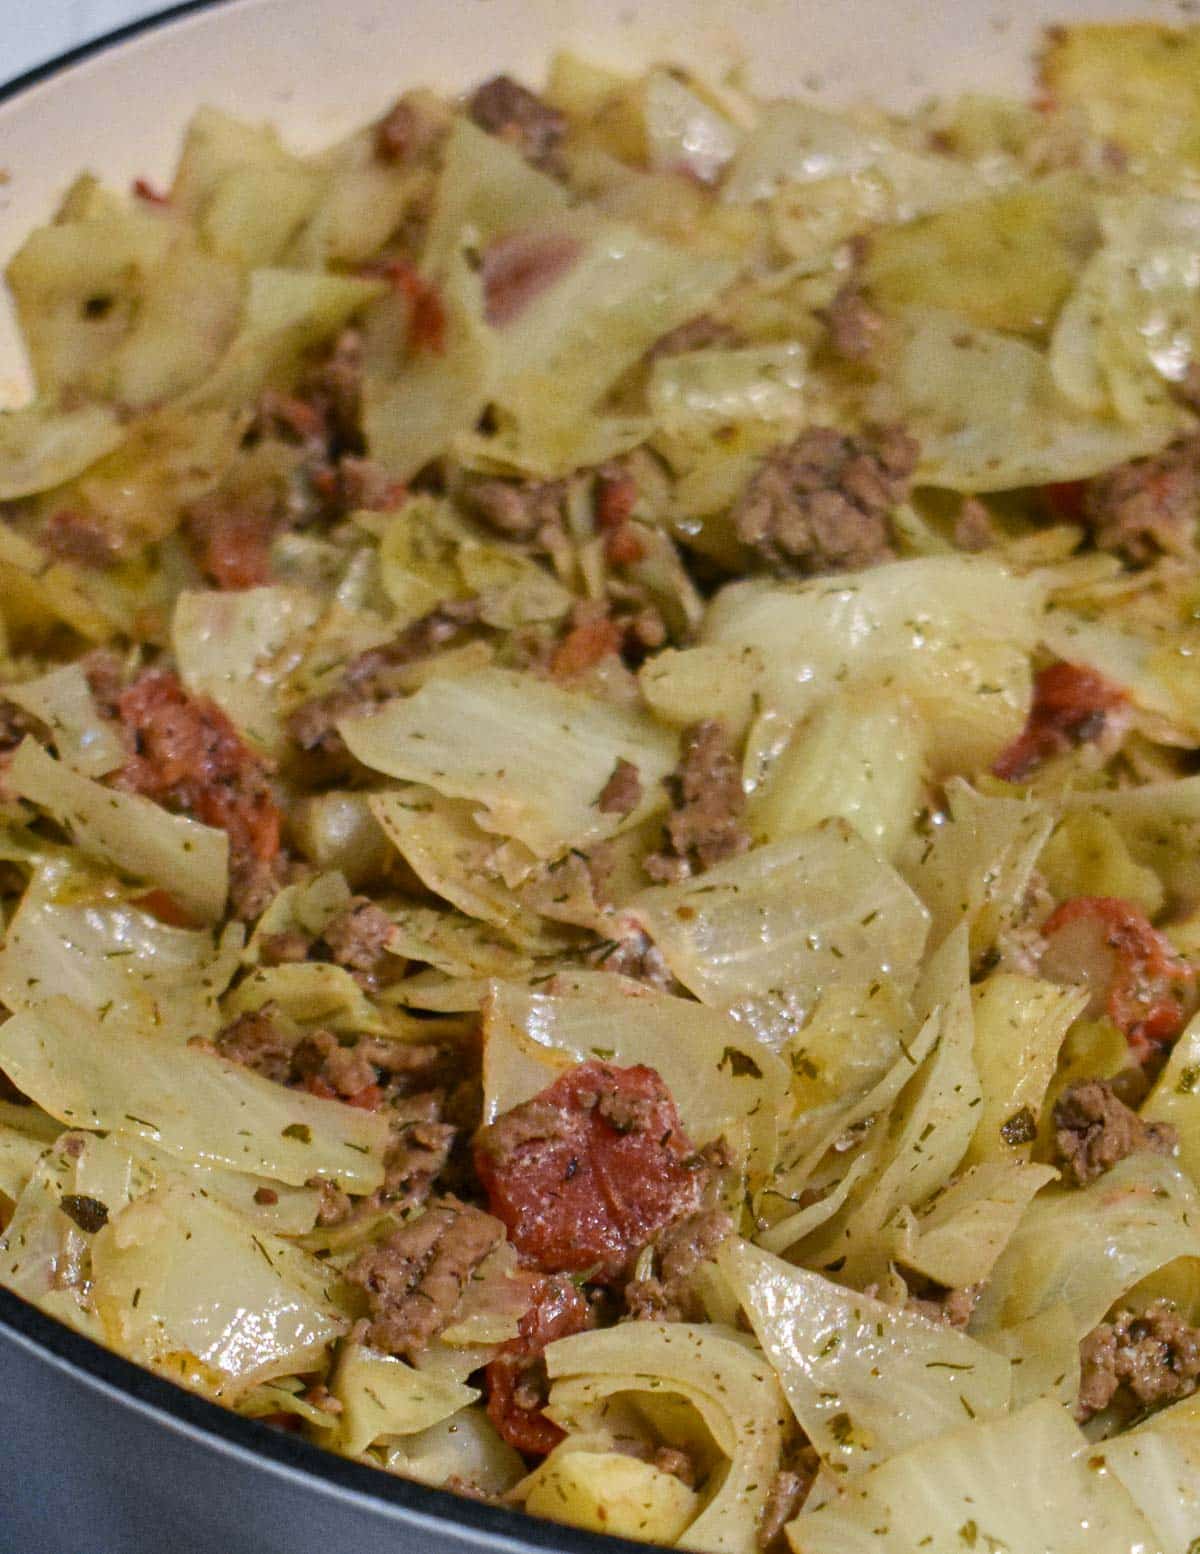 Cabbage and ground beef in the skillet ready to eat.